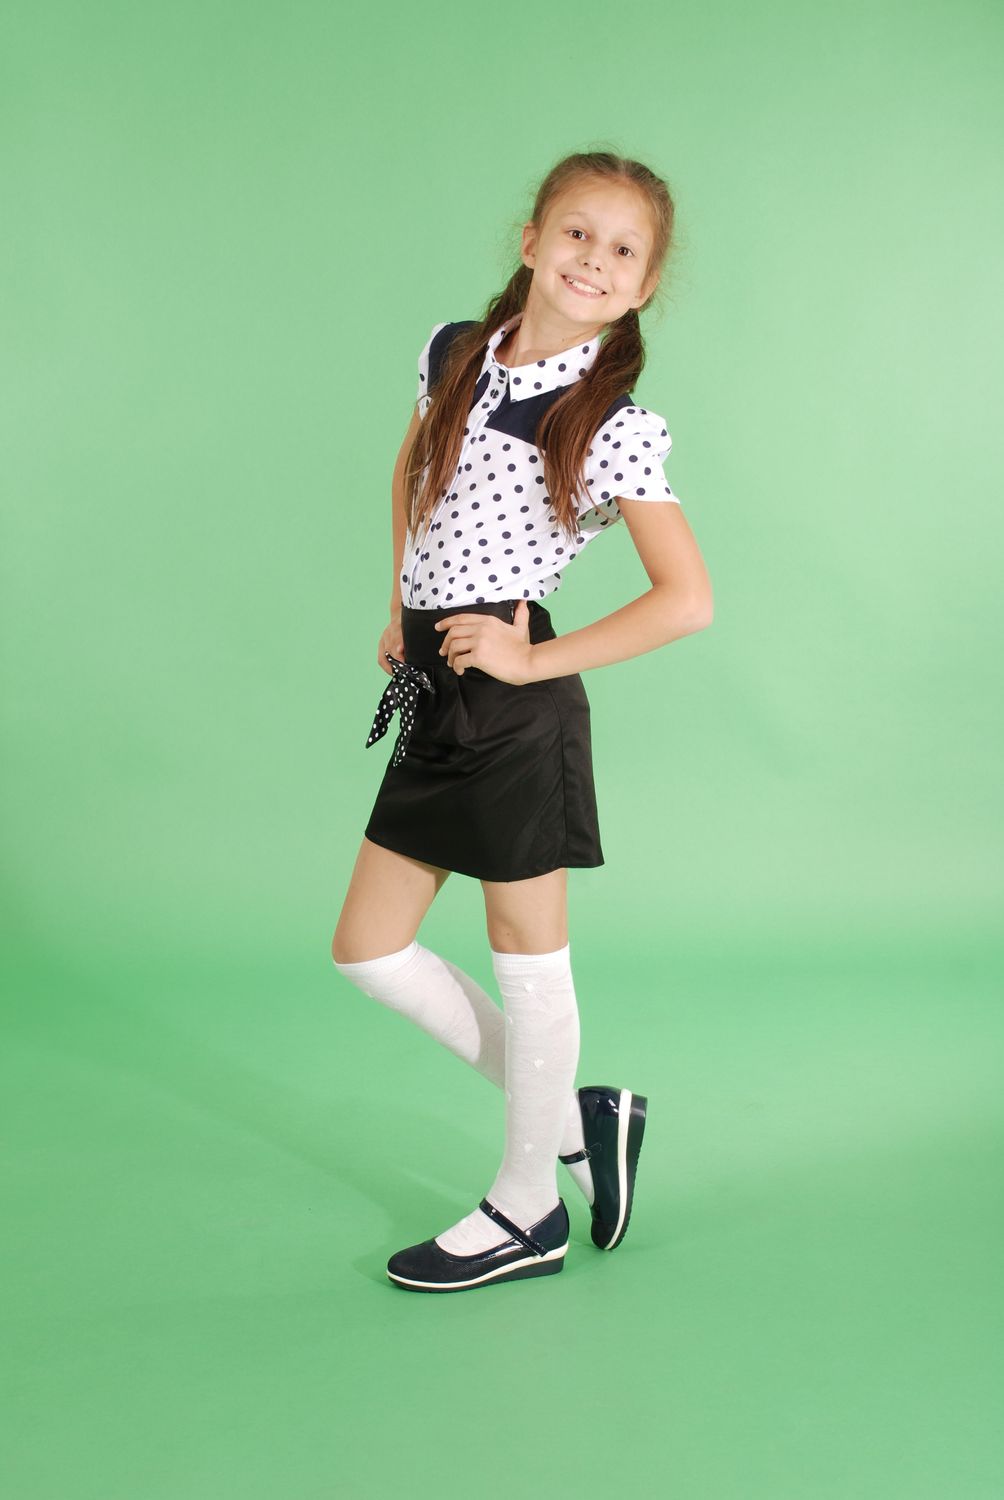 Beautiful young girl in school uniform isolated on green